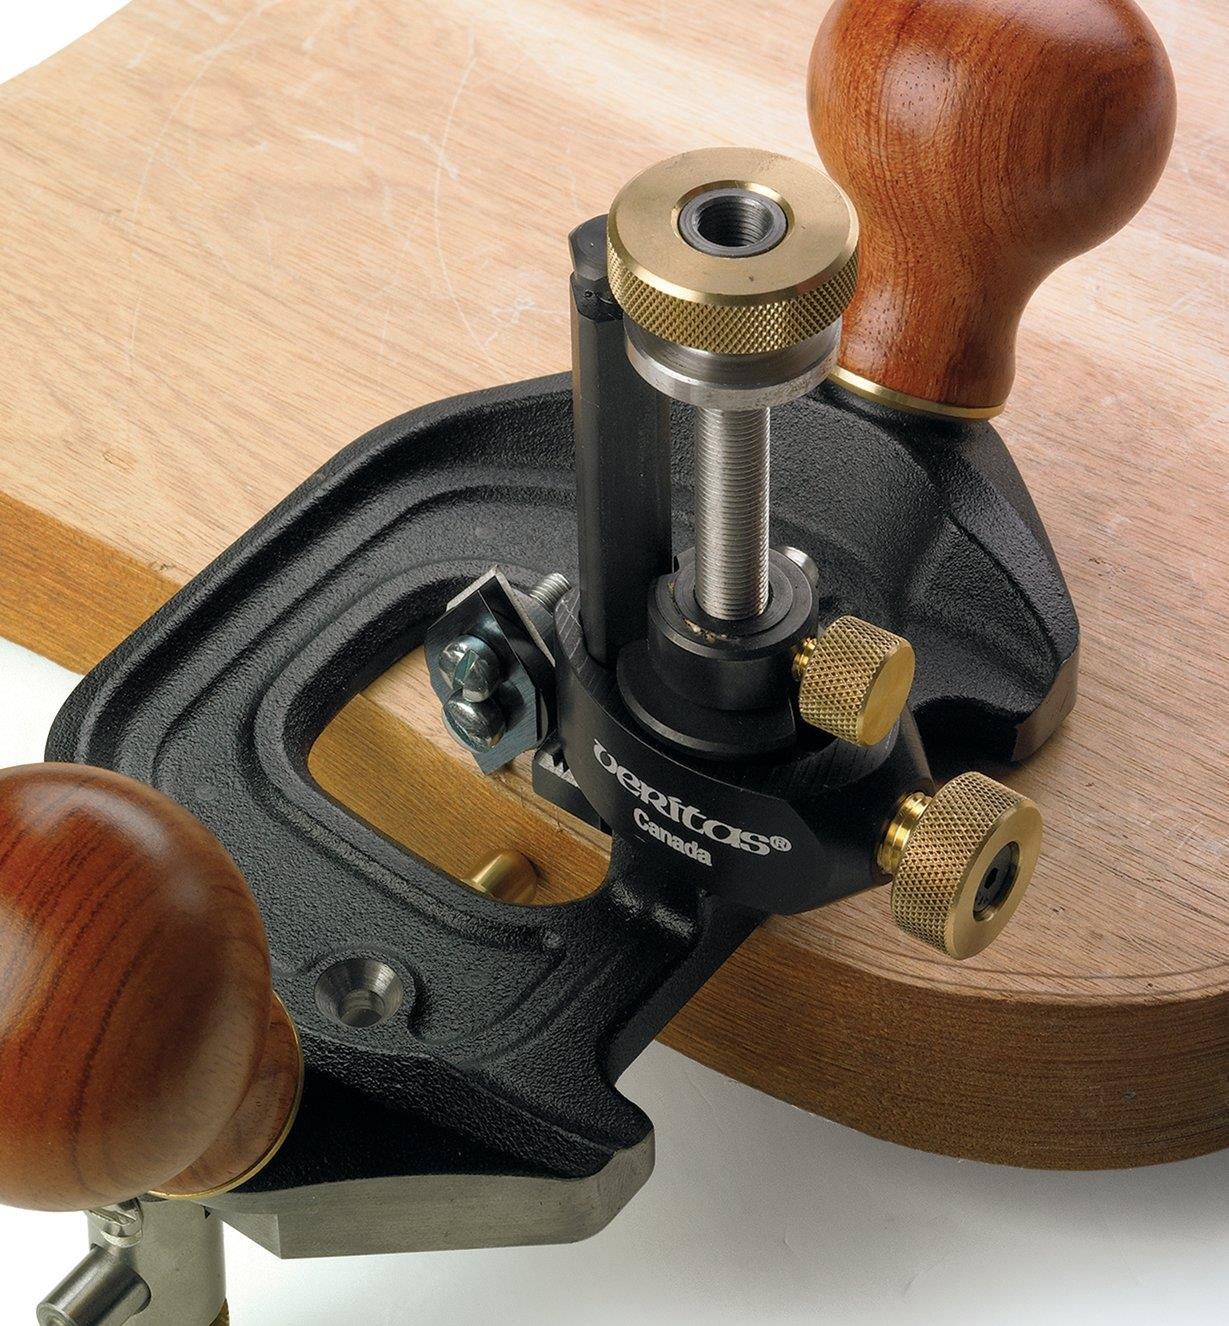 05P3845 - Inlay Cutter Head for Veritas Large Router Plane